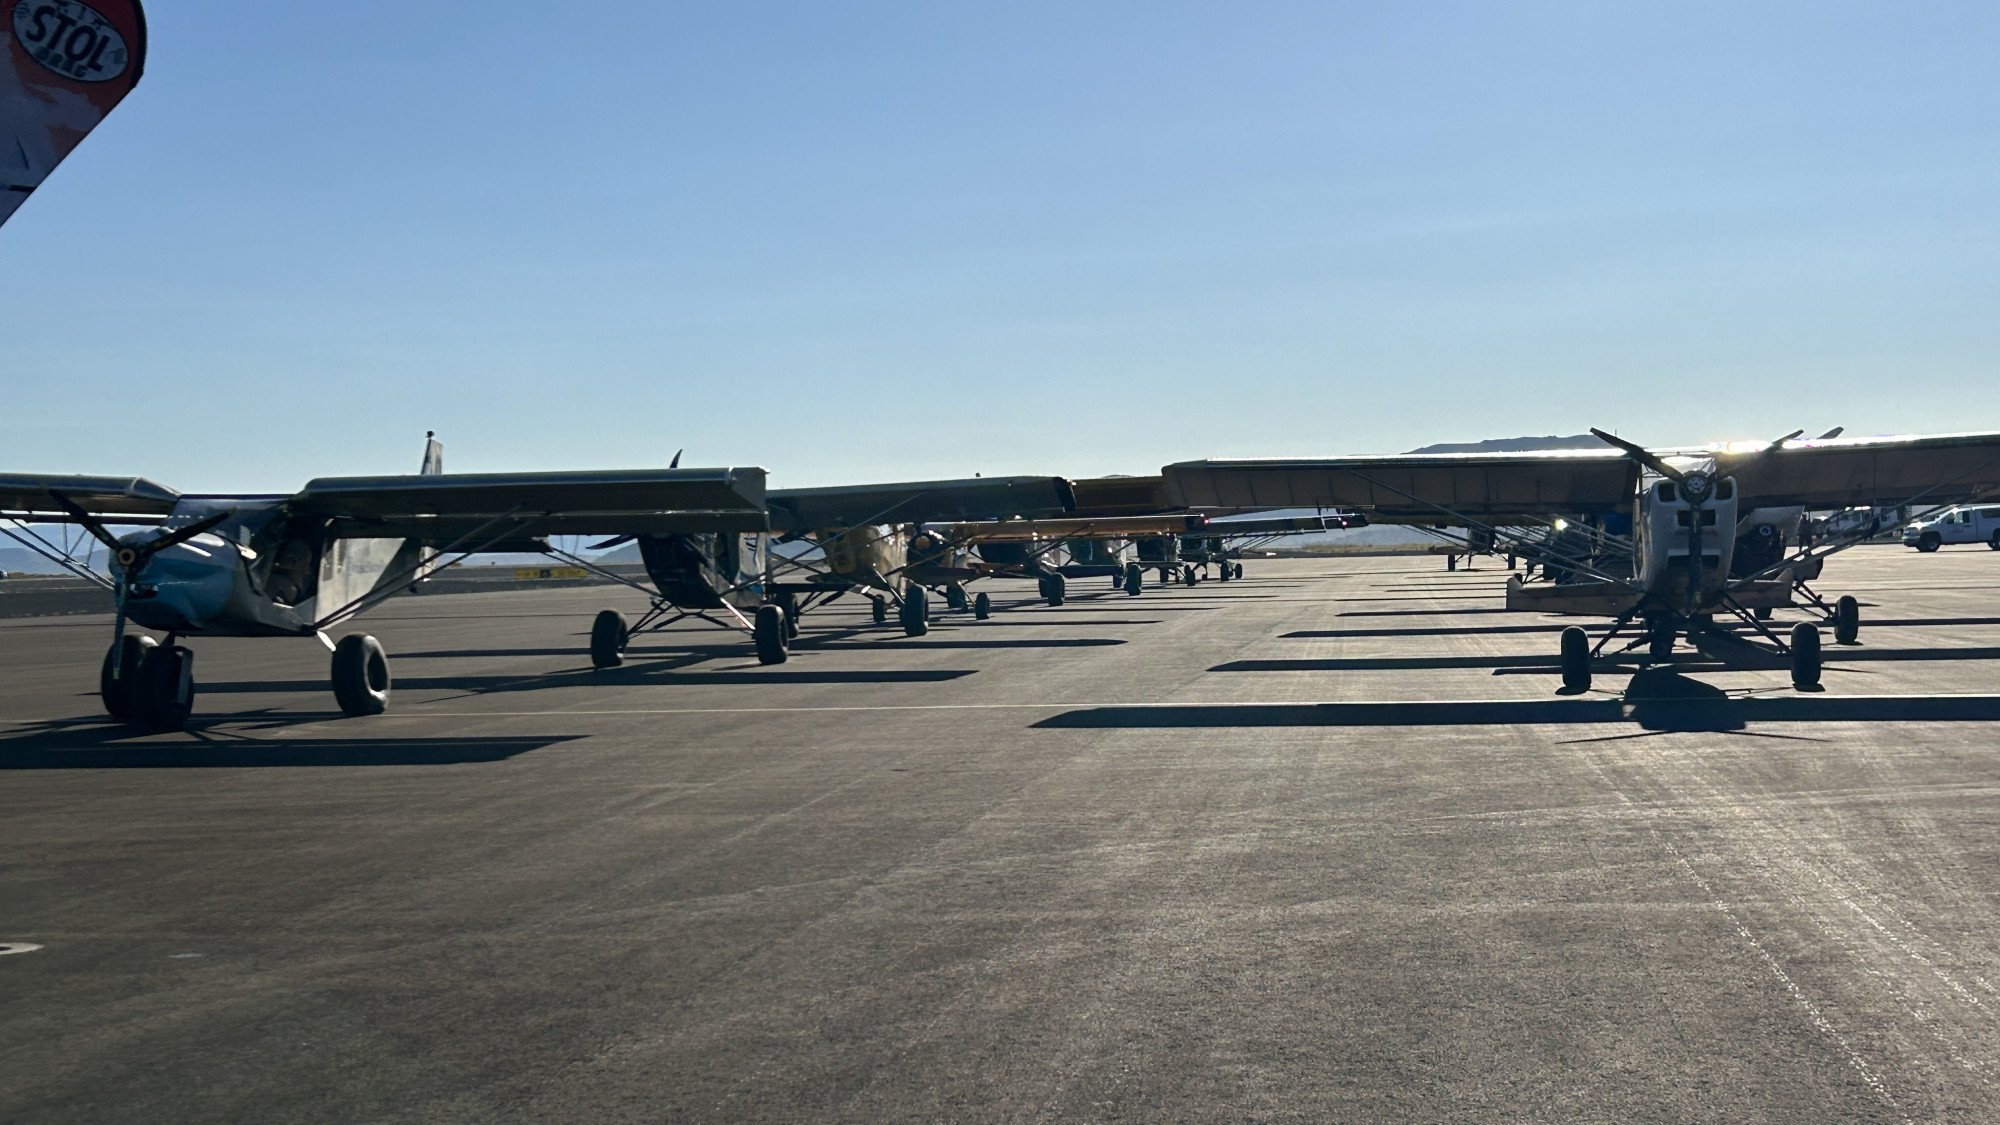 STOL Drag Planes staged ready to taxi to the course for practice.